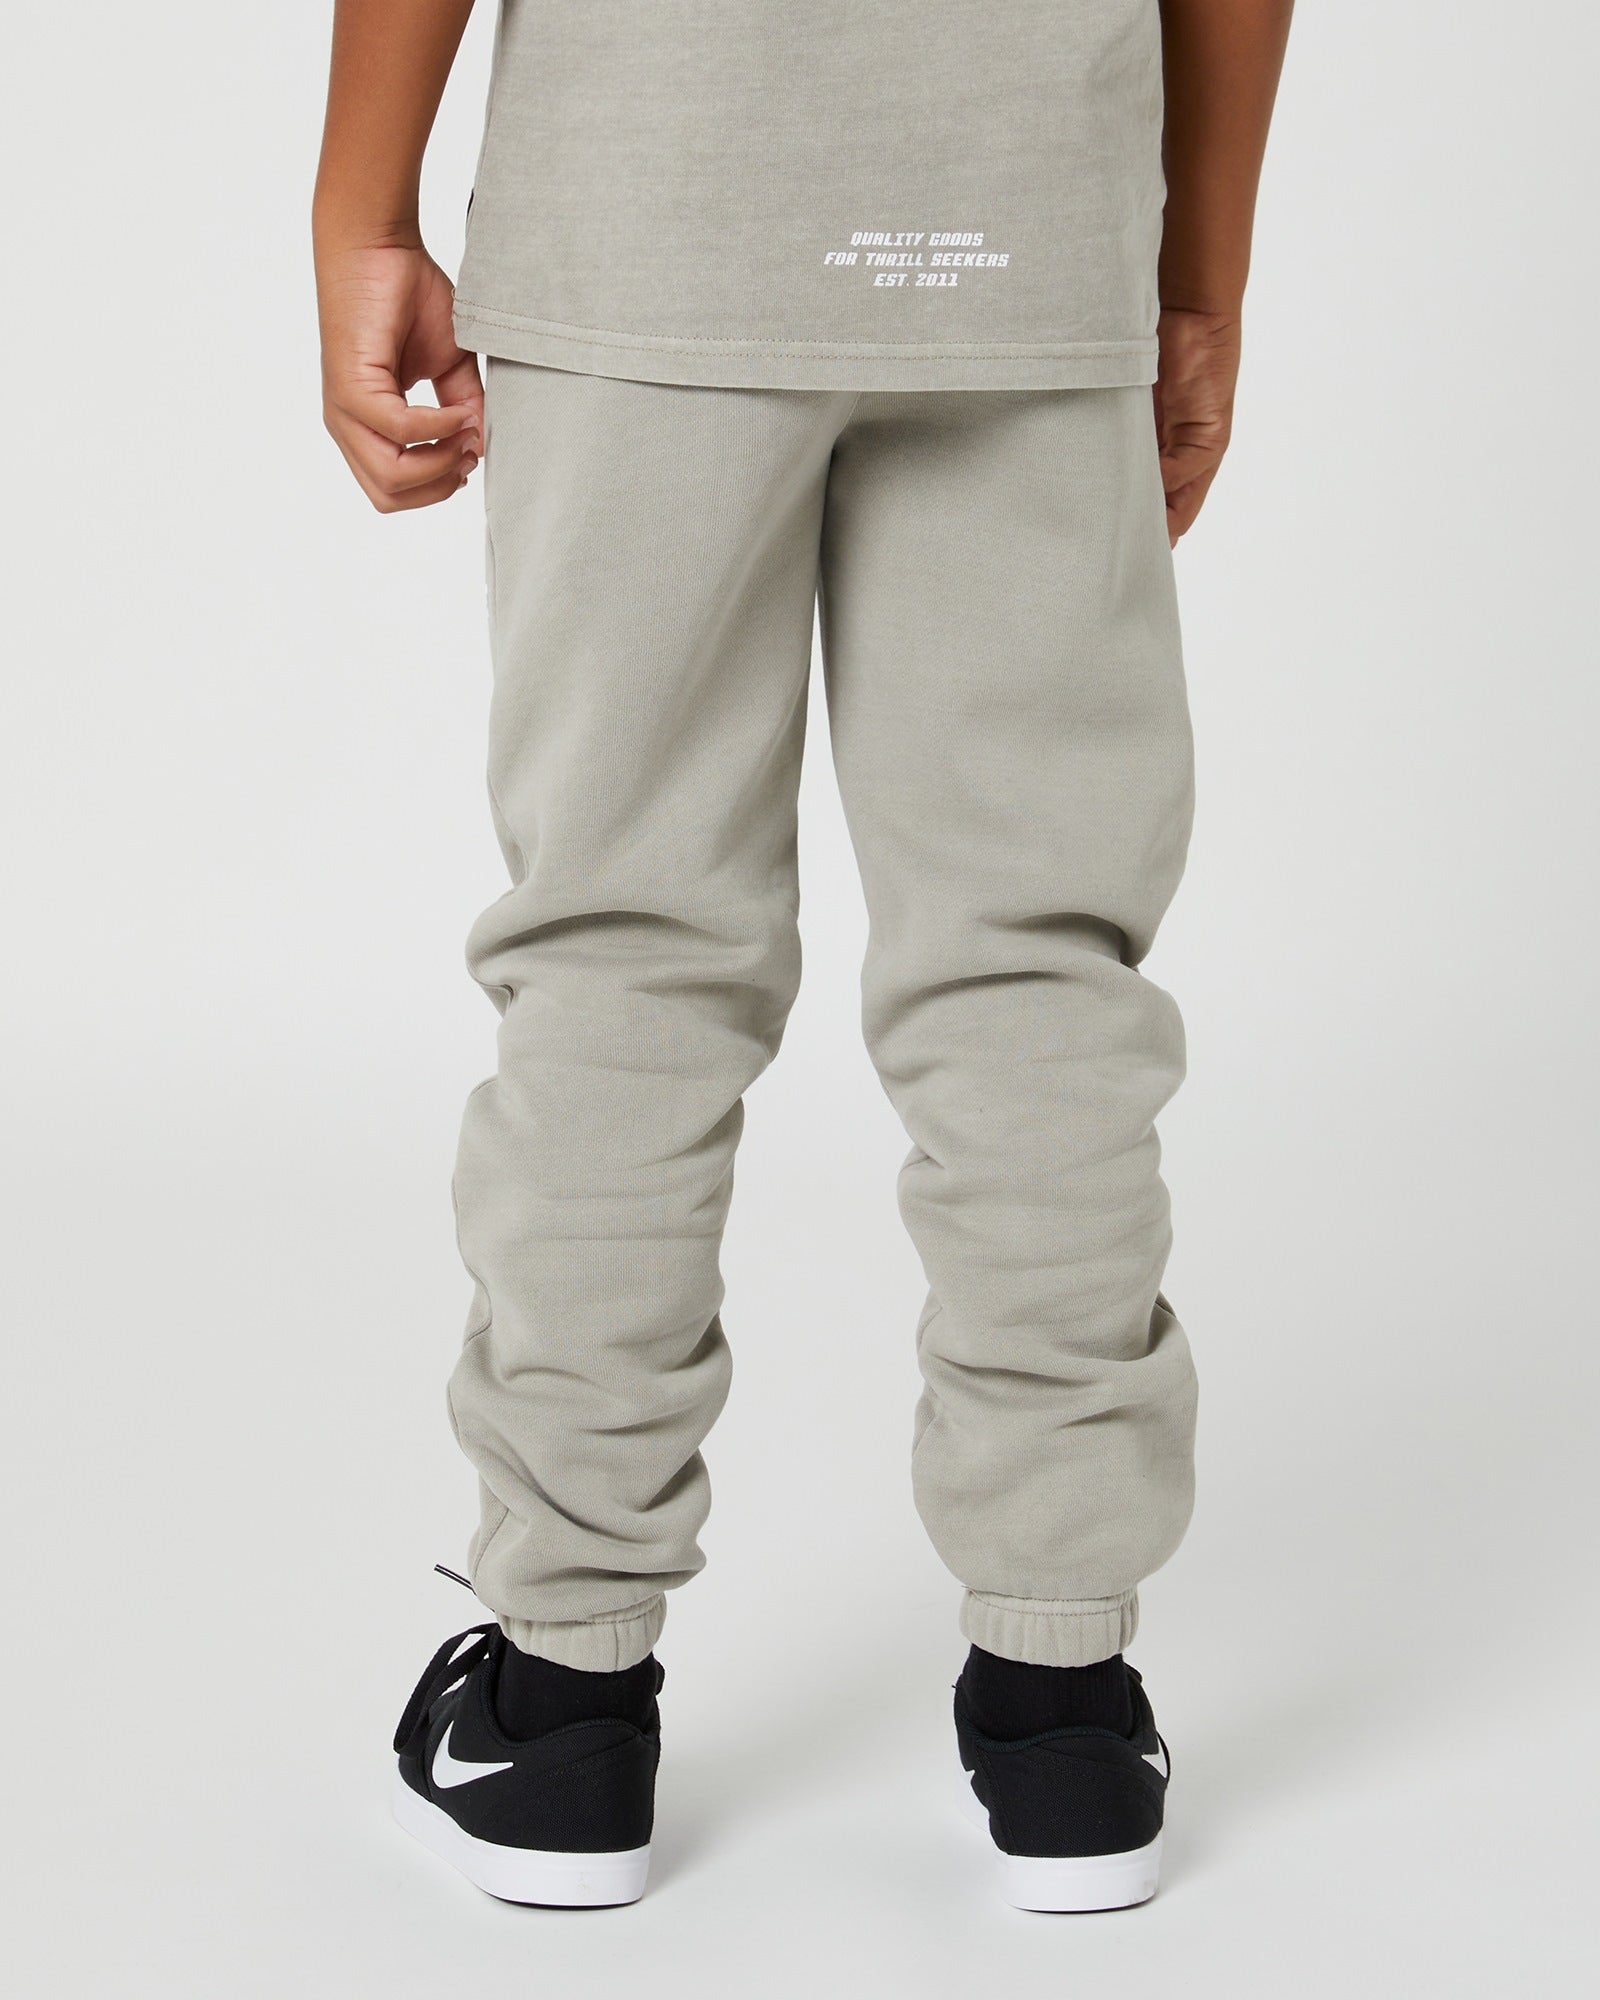 Kids San Clemente Trackpant in concrete by Alphabet Soup featuring a vintage garment dye wash, heavy brushed back fleece, and puff print design on the front leg create the perfect blend of comfort and style. Elasticated waist and ribbed cuff ankles ensure an all-day fit.